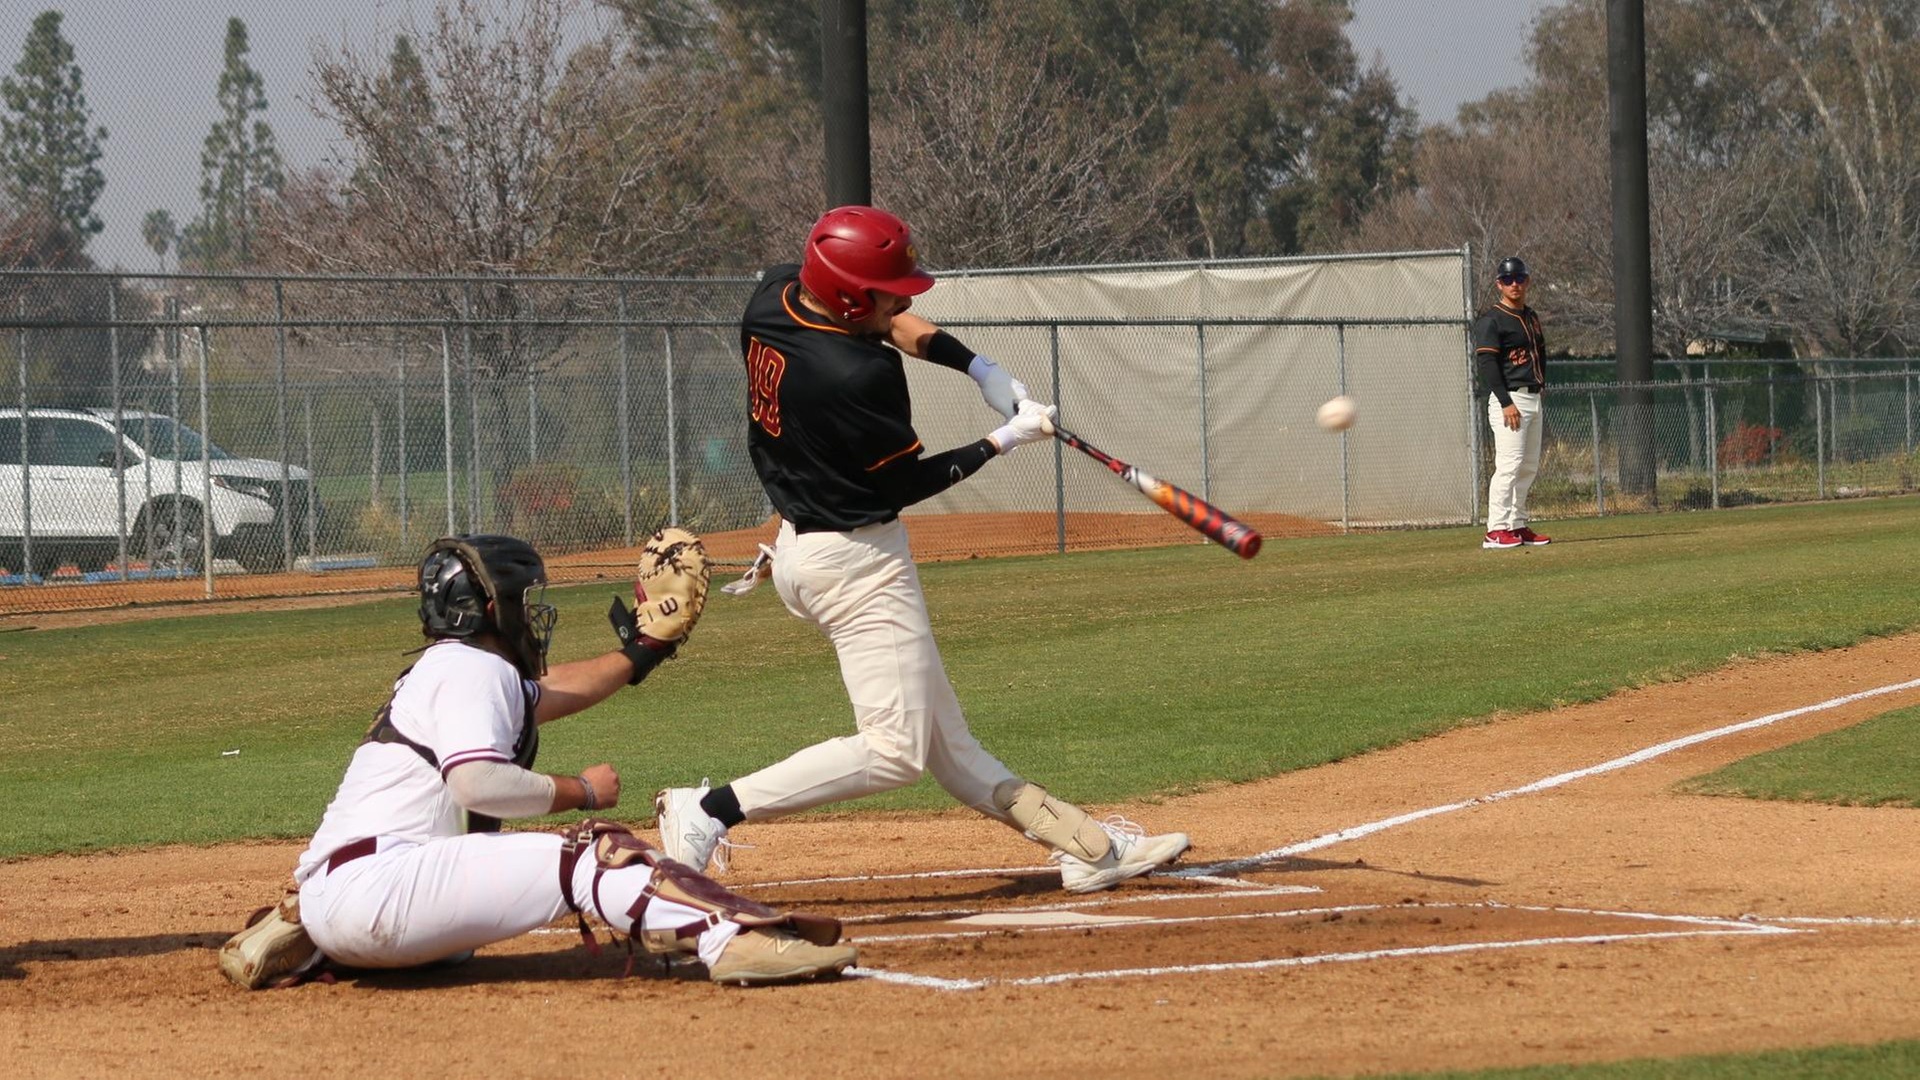 Julian Sanders was 5-5 with six RBI against Crown (photo by Thomas Walker)